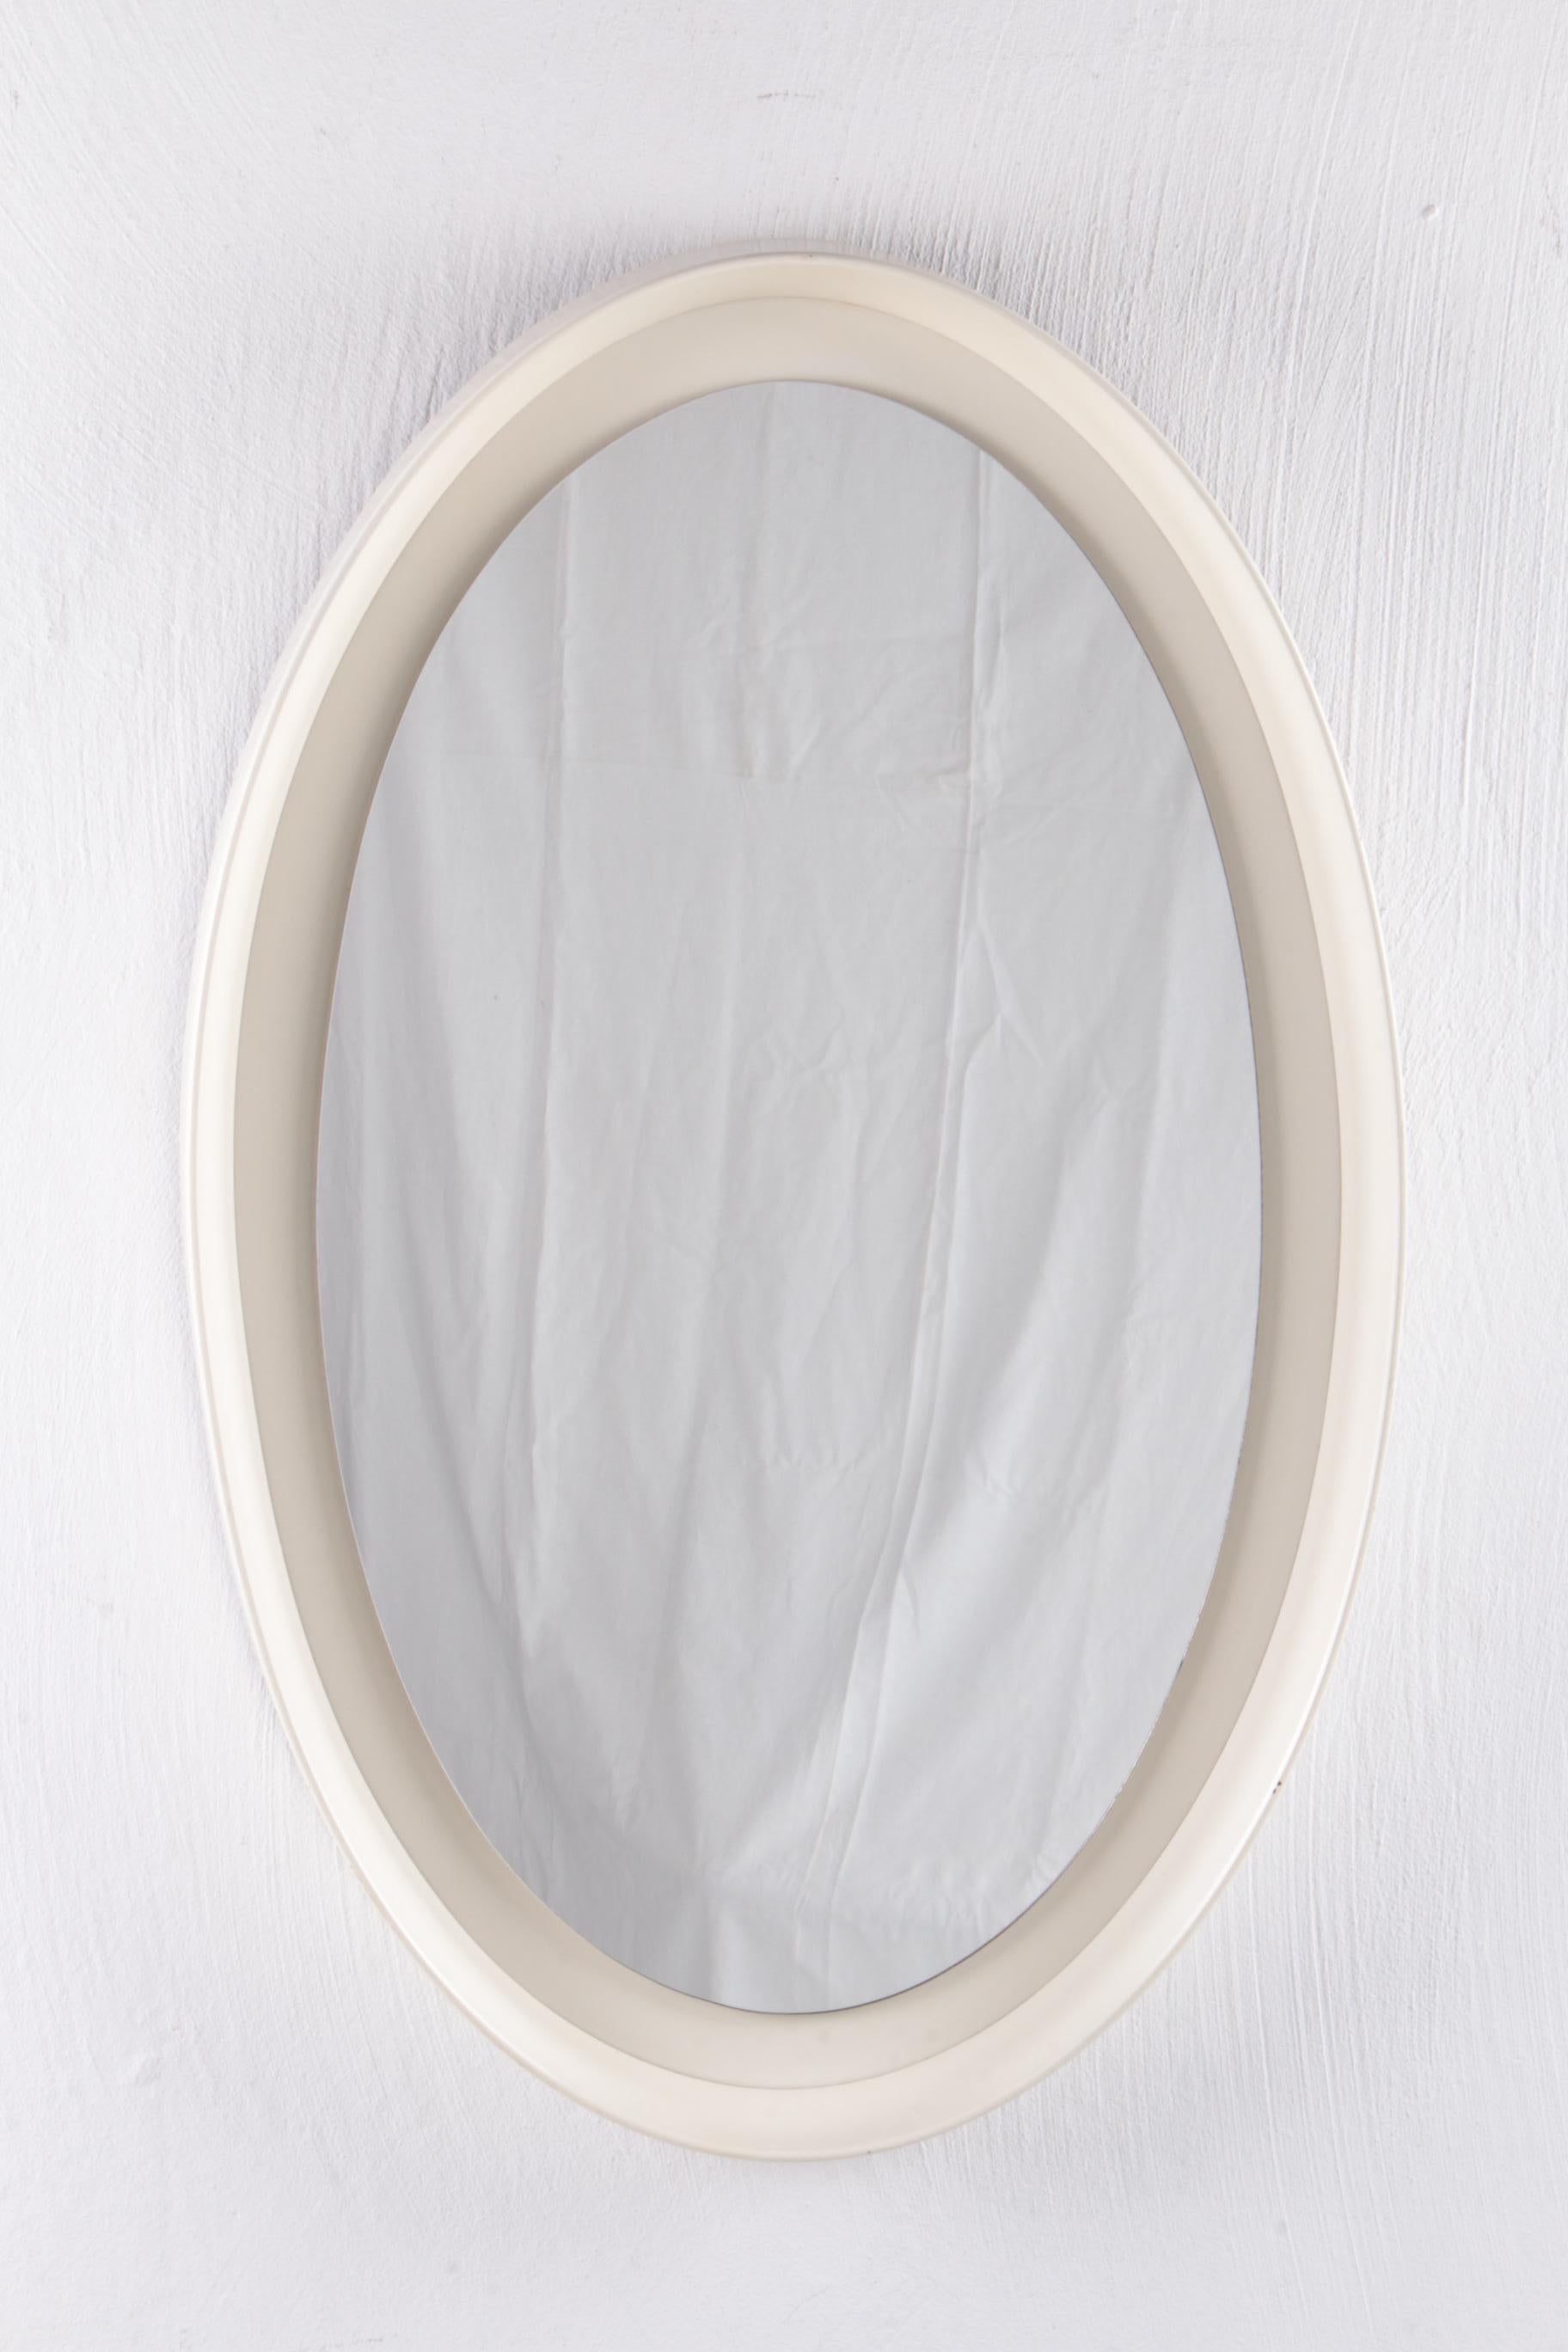 Vintage large white wooden oval wall mirror 1960s

This is a beautiful Oval vintage mirror made in the 1960s. What would this mirror have seen before, we want to know even better.

You can hang this mirror in many places in your house.

The